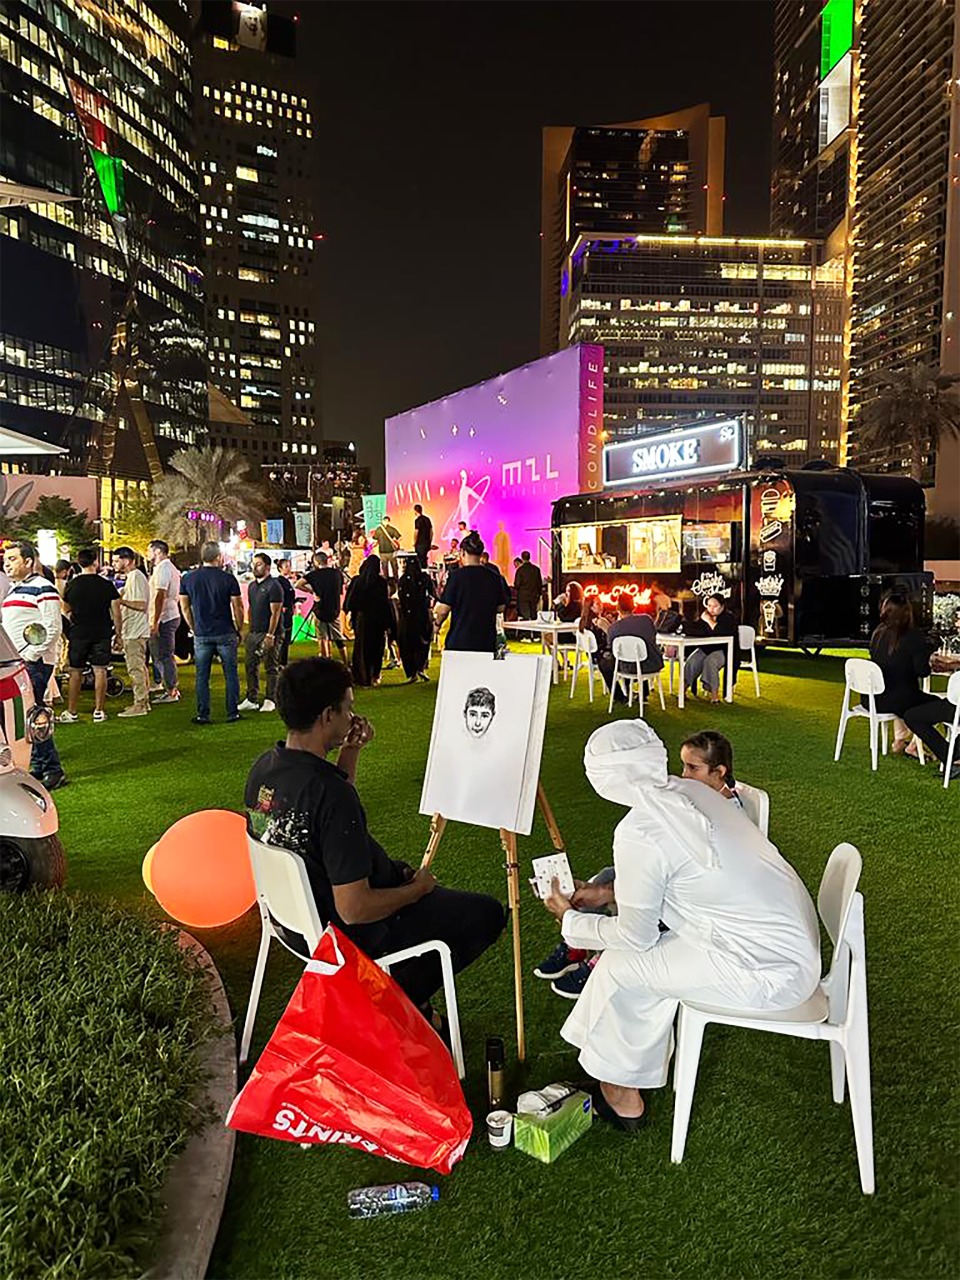 Enjoy the winter vibes at the M2L Market at Gate Avenue DIFC this season